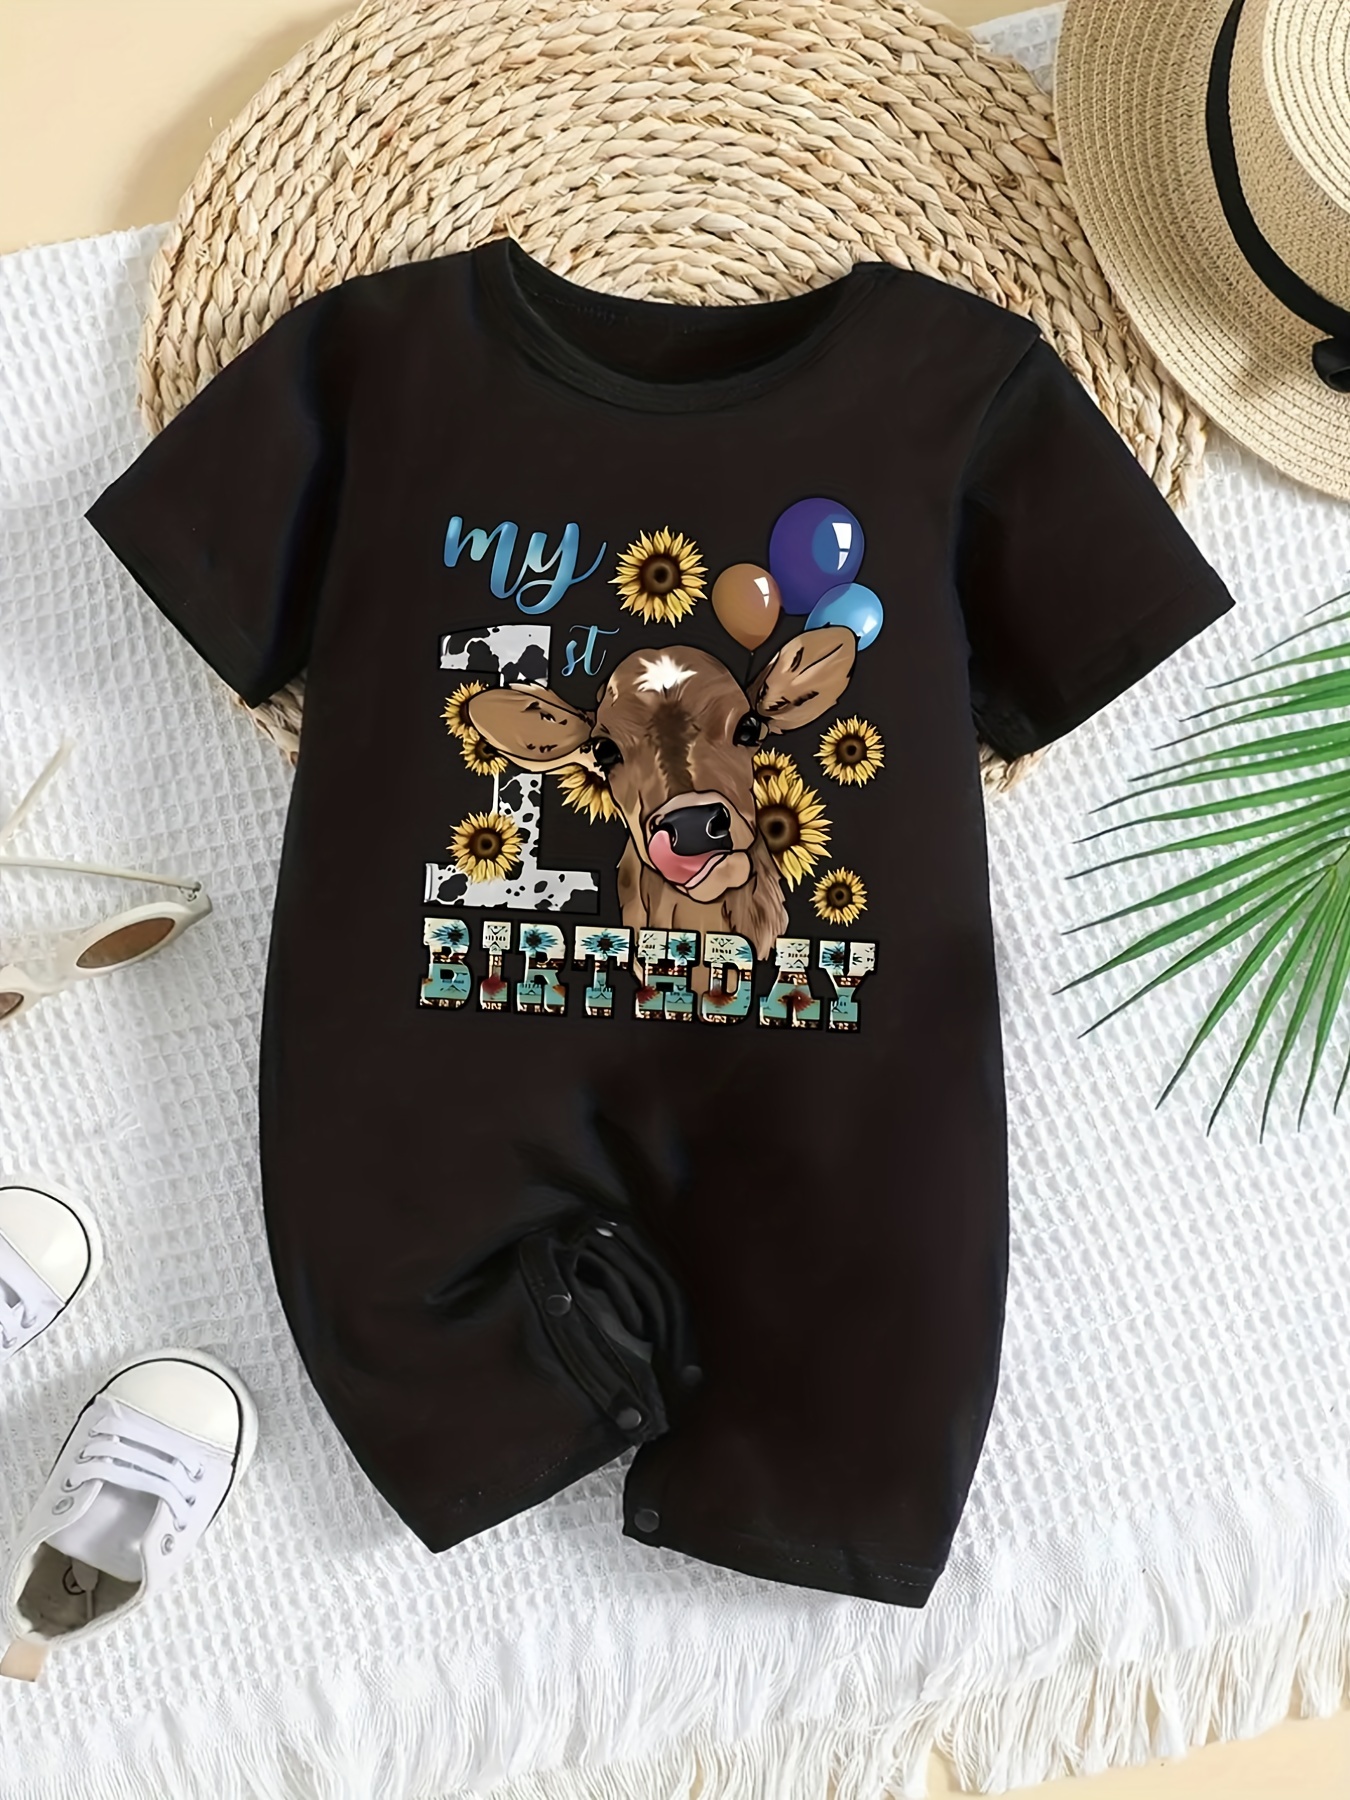 Baby Girls Boys 1st Birthday Cute Bodysuits, Short Sleeve Cotton T-shirt  Spring Summer Autumn Infant Jumpsuits Kids Party Clothes